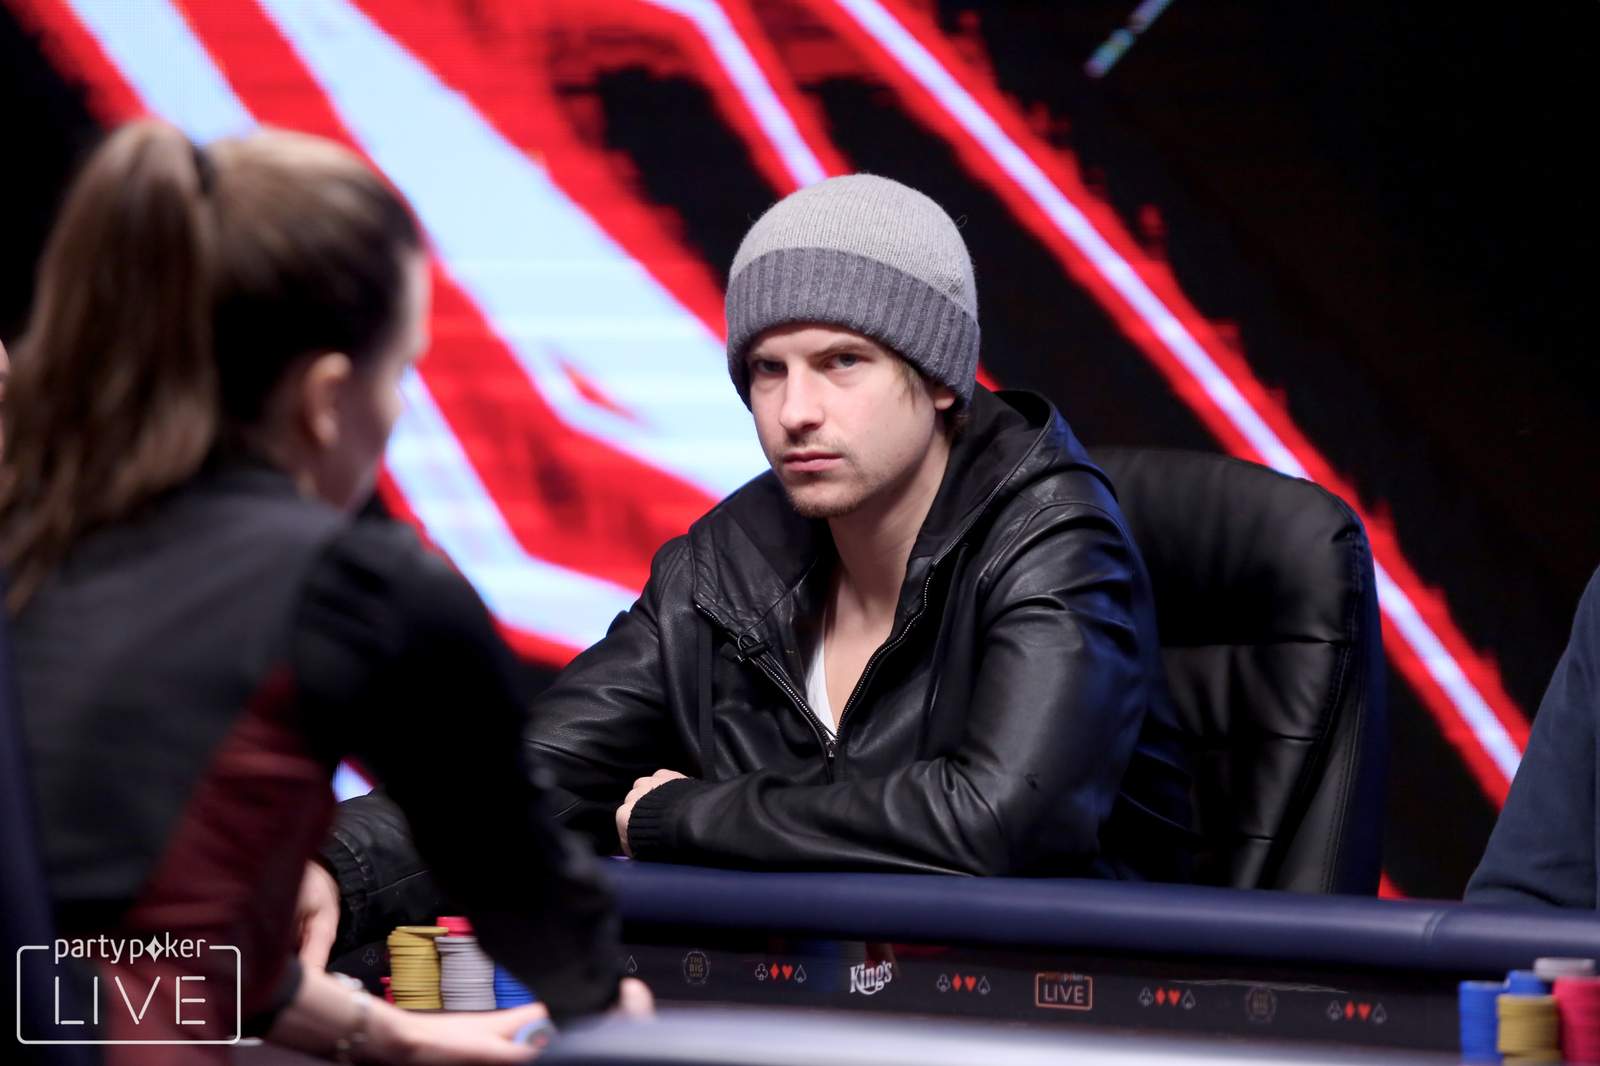 Super High Roller Bowl Online Series Kicks Off With Three Star-Studded Final Tables